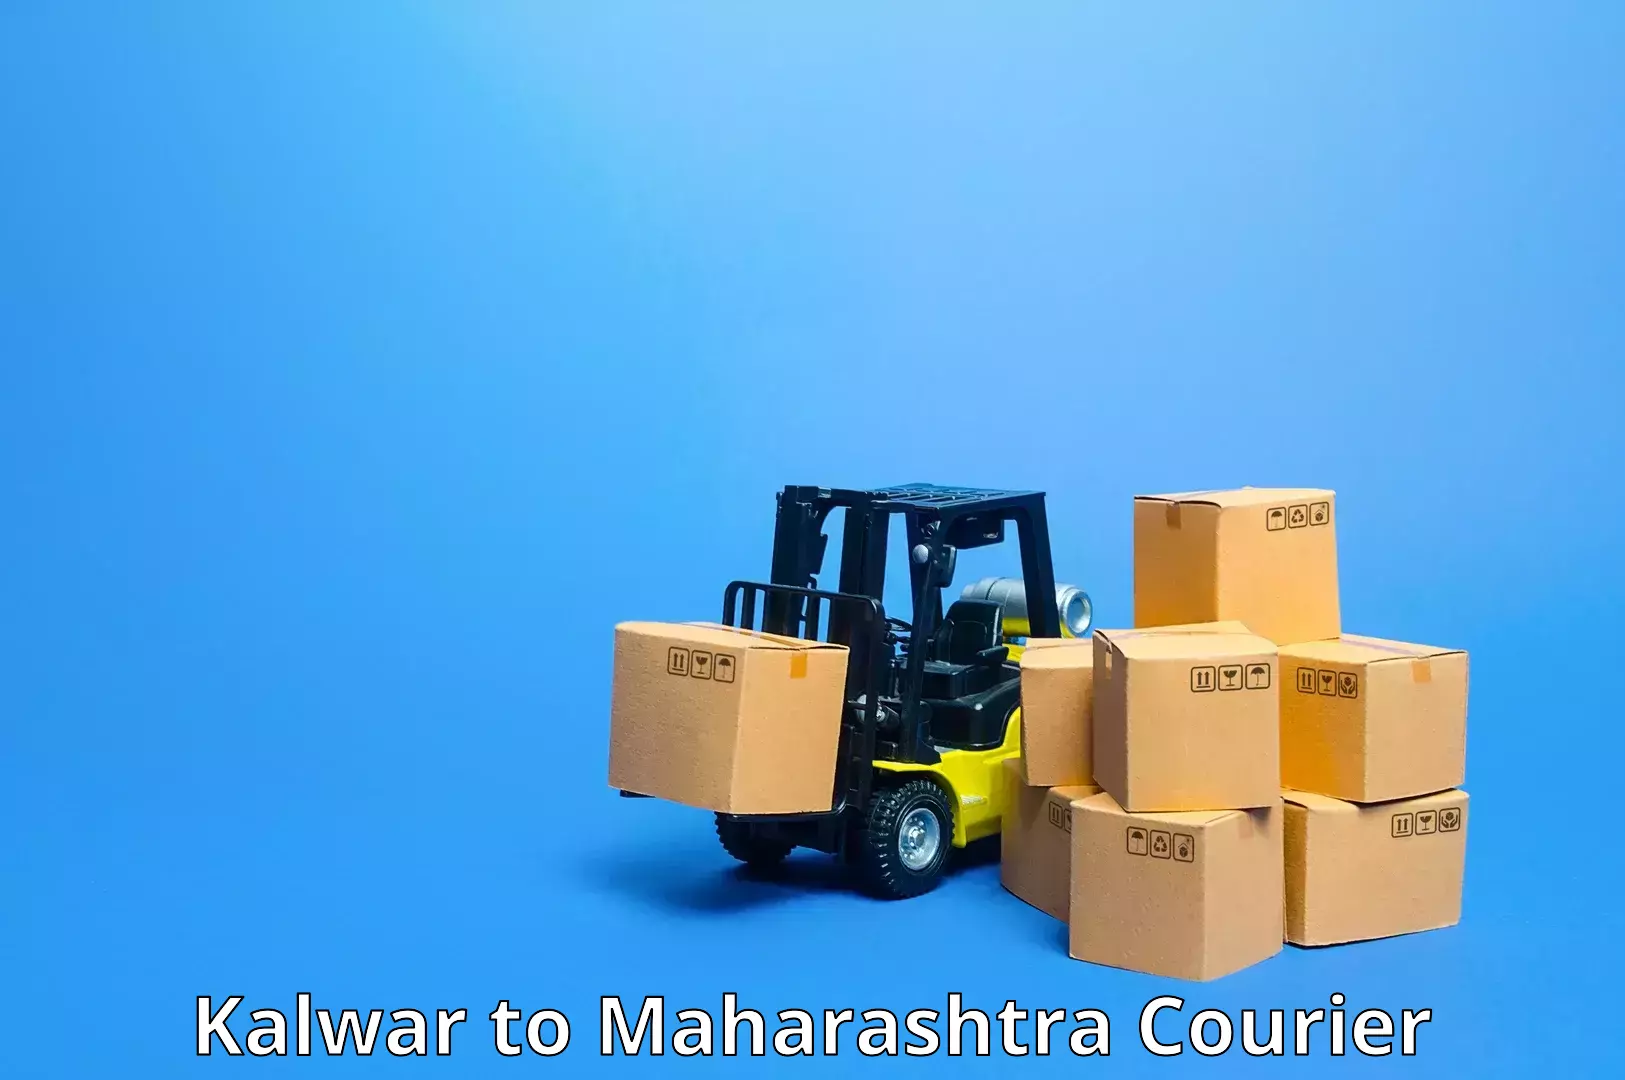 Overnight delivery services Kalwar to Khandala Pune